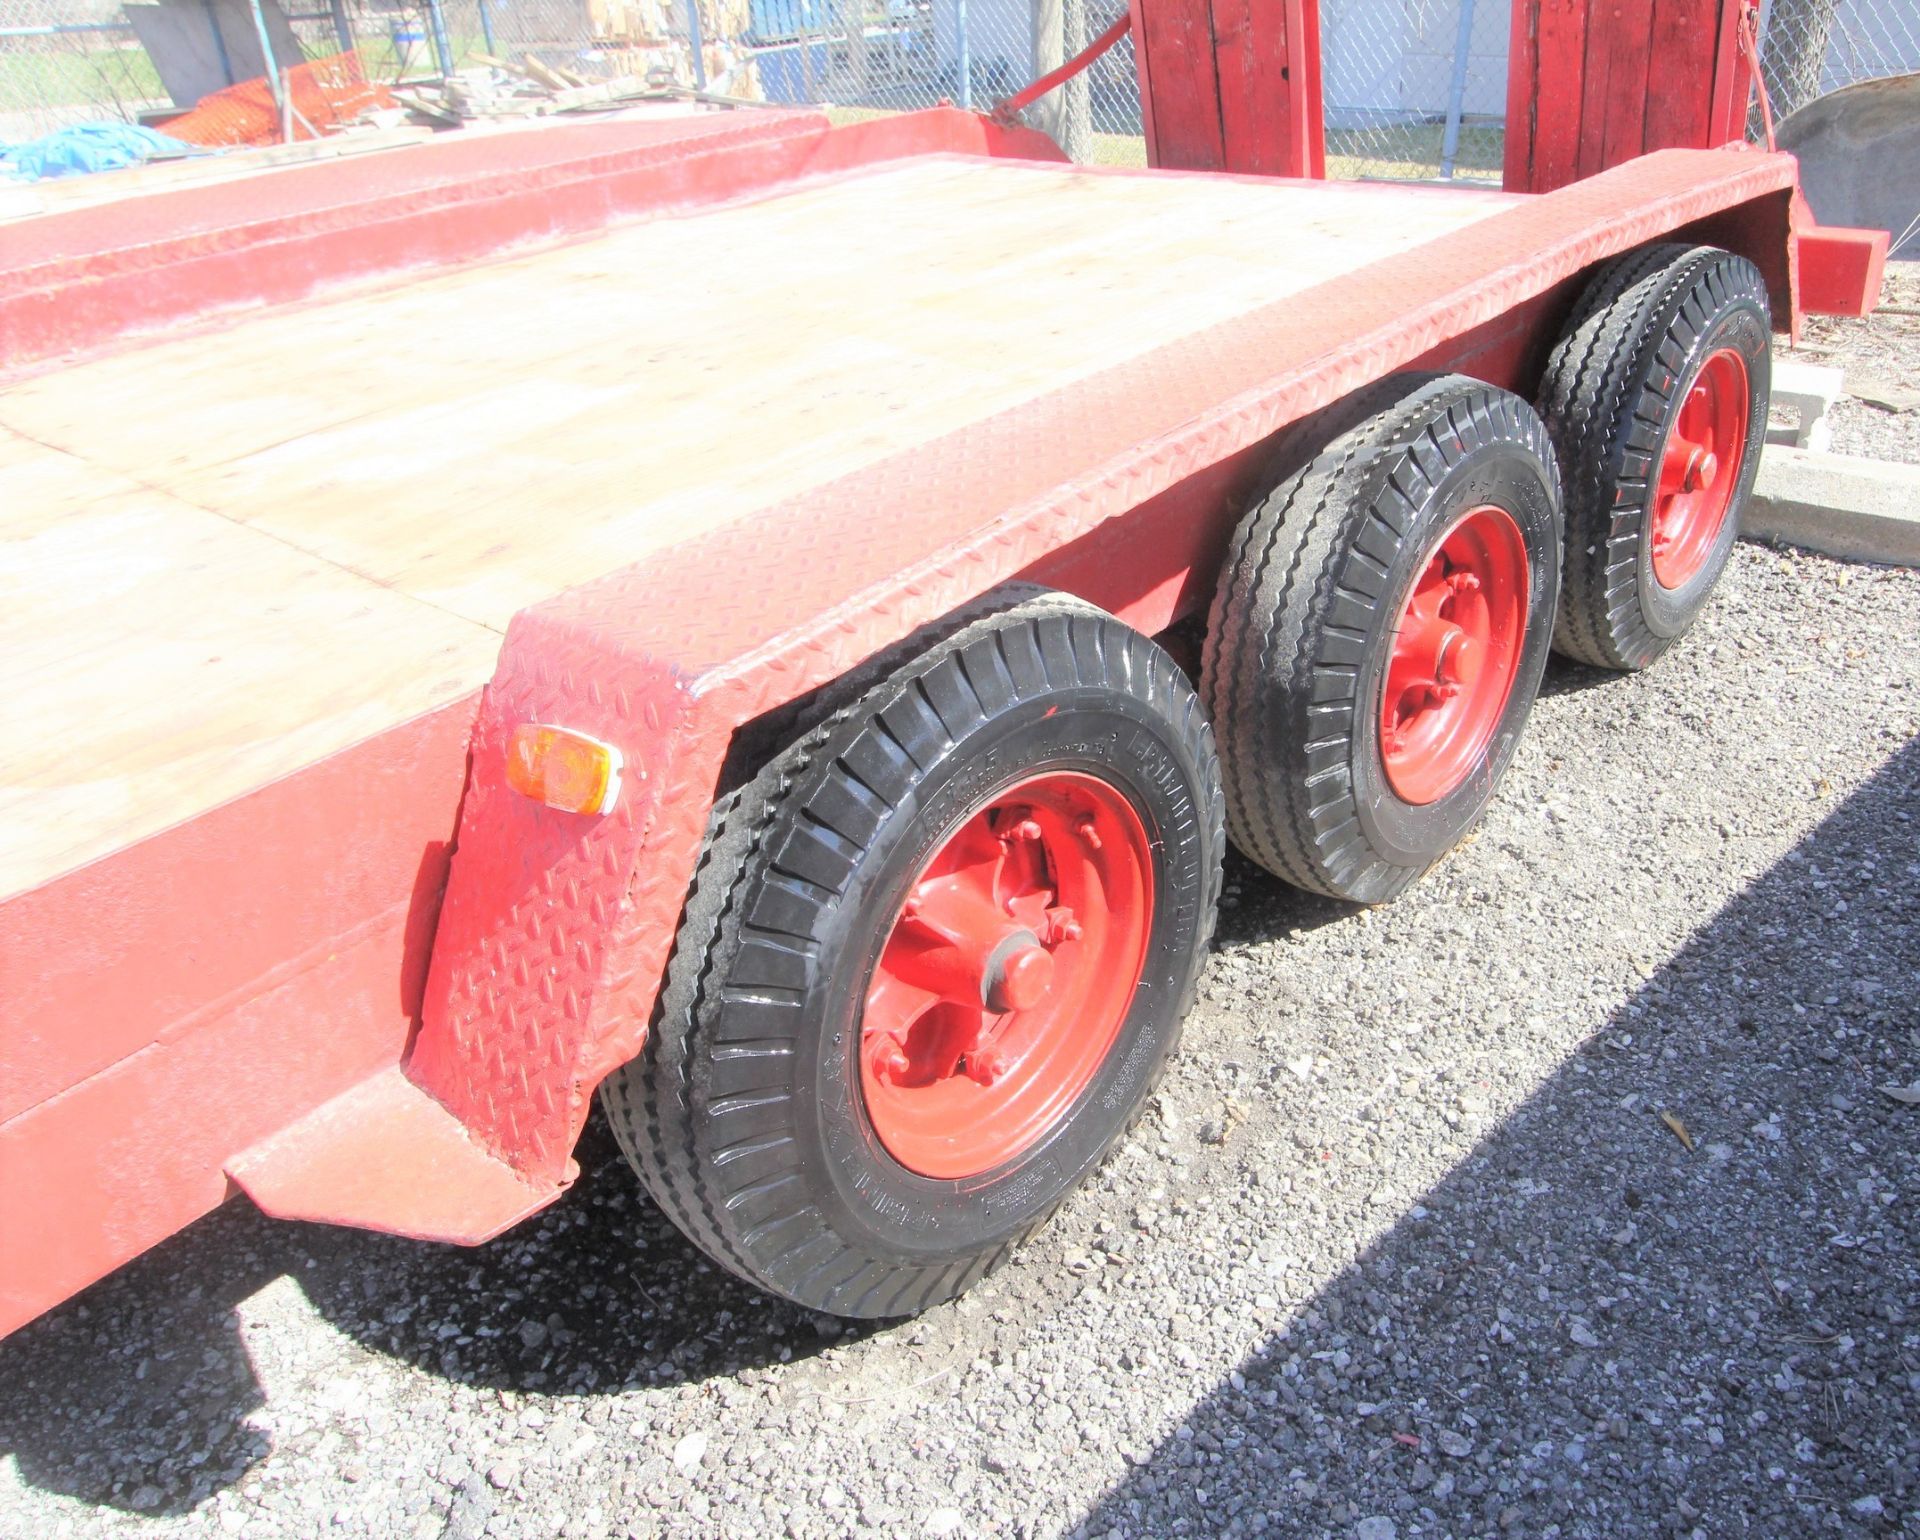 J.C. TRAILERS 18' TRI-AXLE EQUIPMENT TRAILER, 18,000 LBS. MAX CAPACITY, WOOD DECK, SPRING - Image 7 of 8